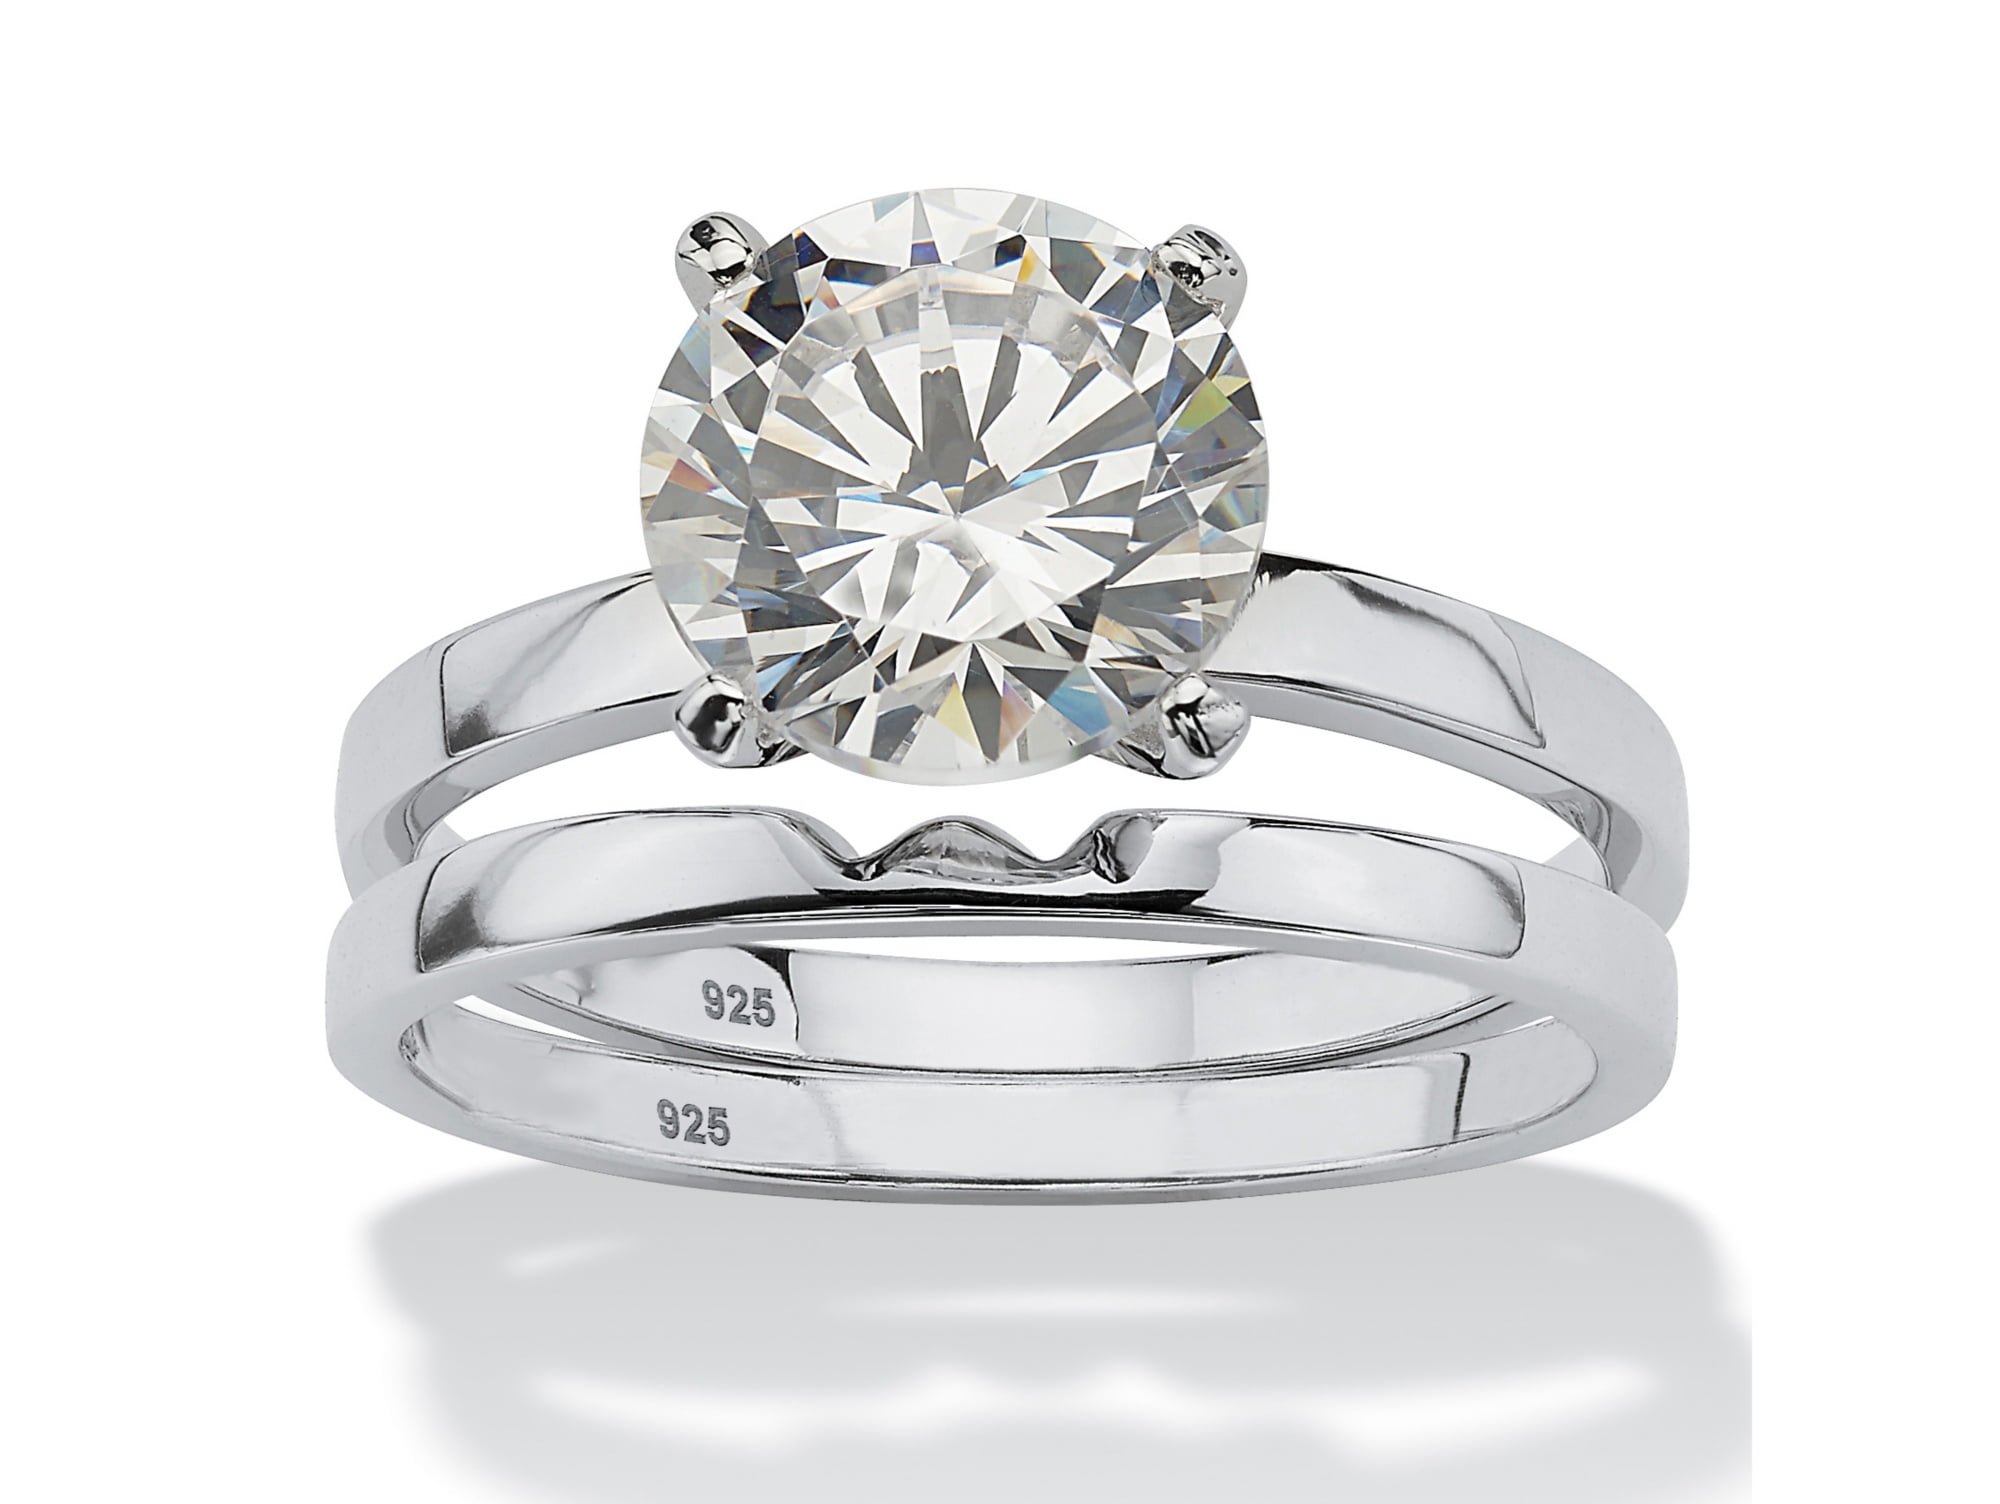 3.7 TCW Classic Round Solitaire CZ Bridal Engagement Wedding Ring Set Size 5-10 